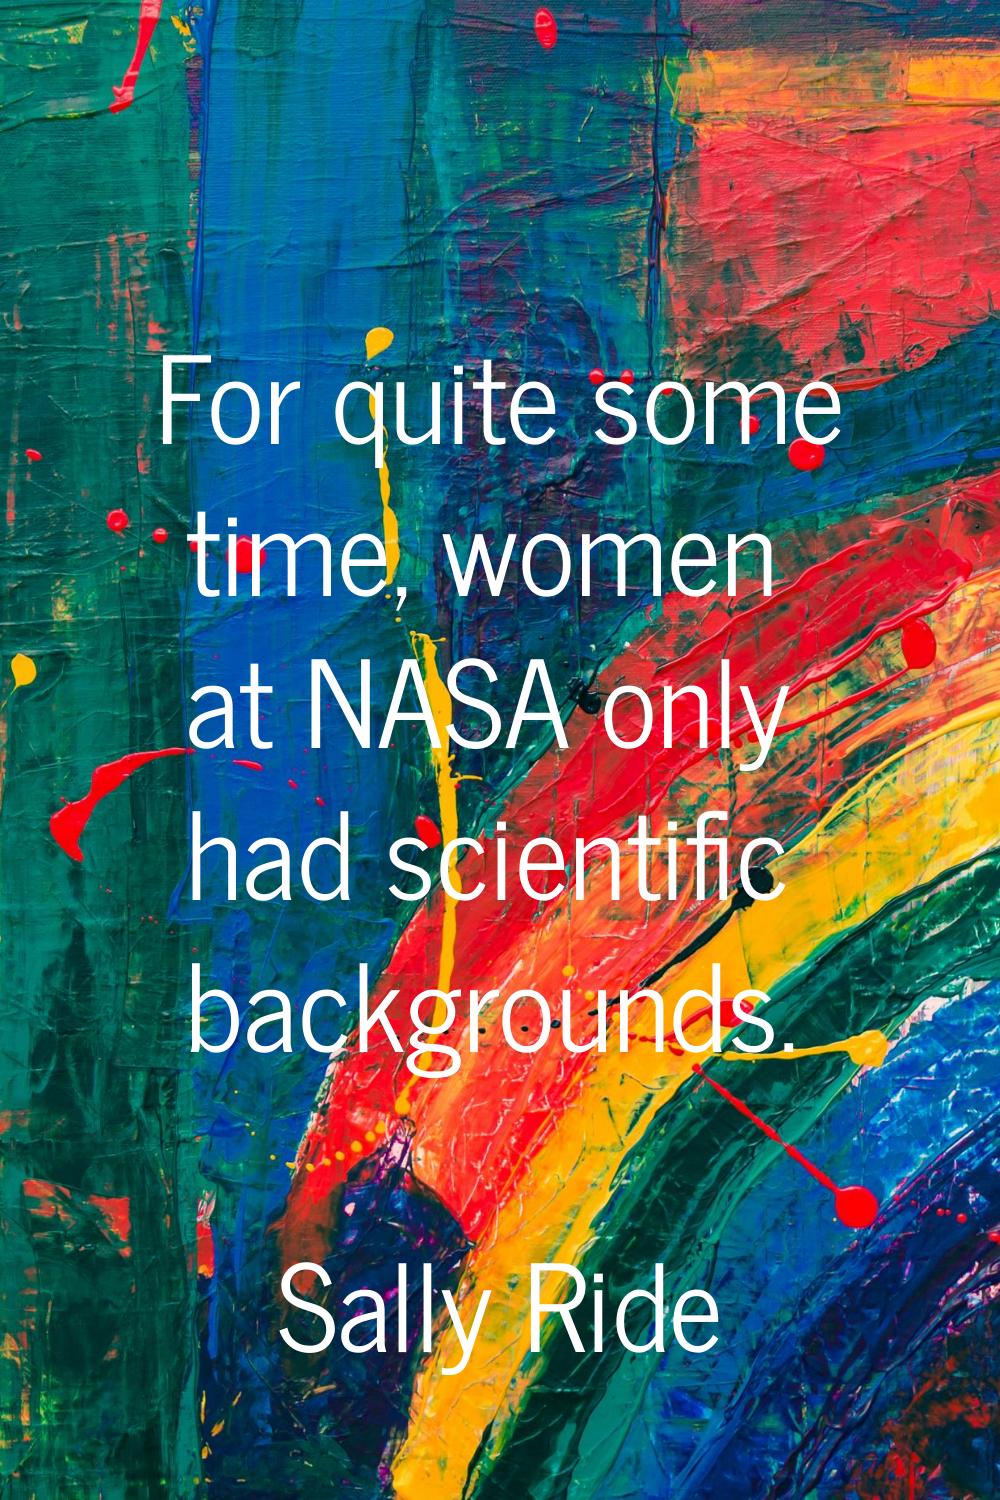 For quite some time, women at NASA only had scientific backgrounds.